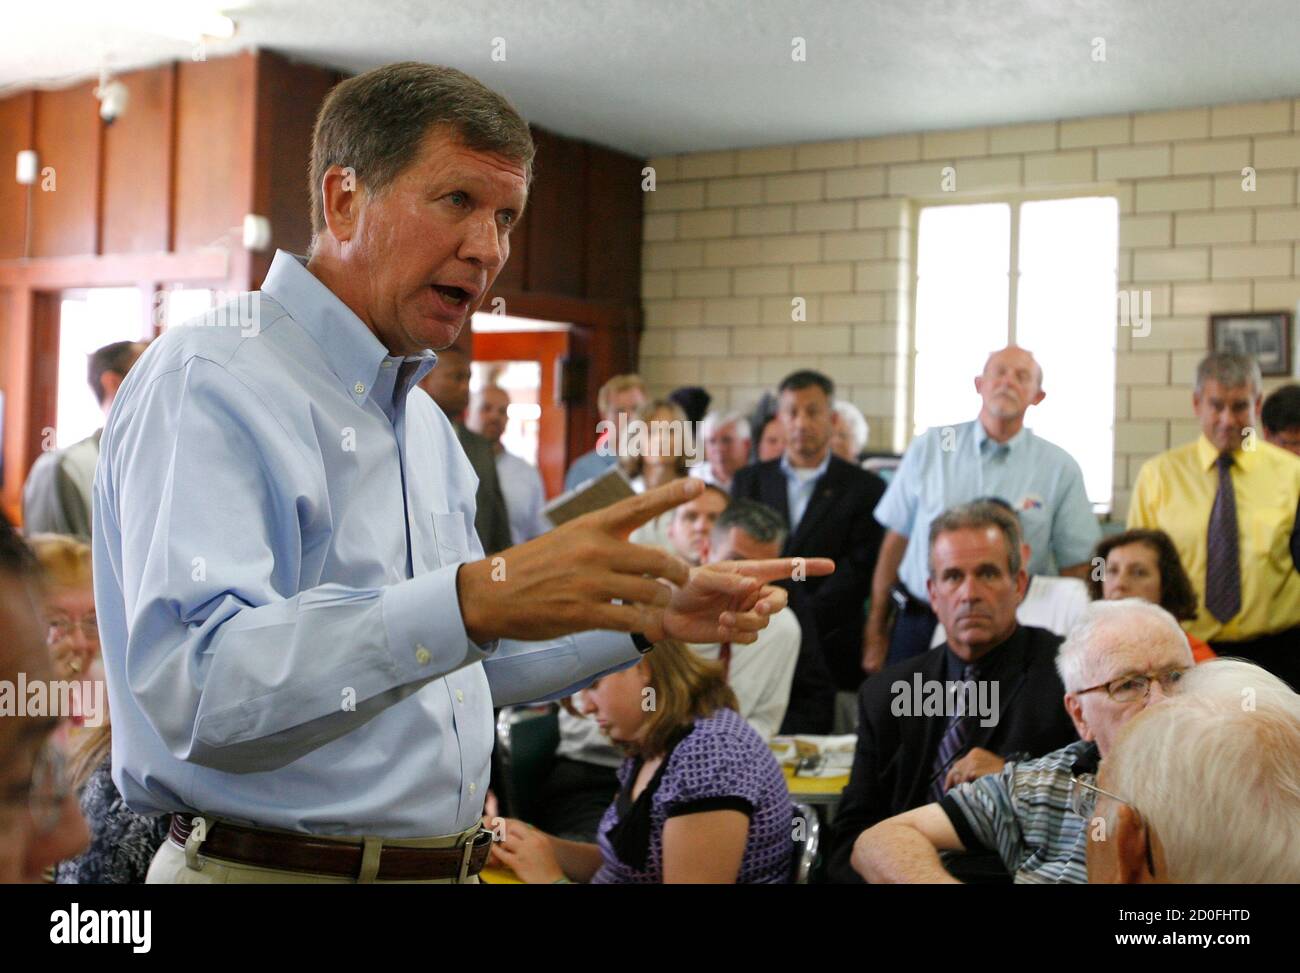 Republican gubernatorial candidate John Kasich (R-OH) speaks to supporters during a campaign stop in Zanesville, Ohio, August 4, 2010. As Lehman Brothers spiraled to its doom in the summer of 2008, Kasich could not help but worry. After all, Kasich, a former Ohio Congressman turned investment banker, had a chunk of his personal fortune invested in the free-falling firm. Picture taken August 4, 2010. To match Special Report USA-ELECTIONS/WALL-STREET    REUTERS/Matt Sullivan    (UNITED STATES - Tags: ELECTIONS POLITICS BUSINESS) Stock Photo